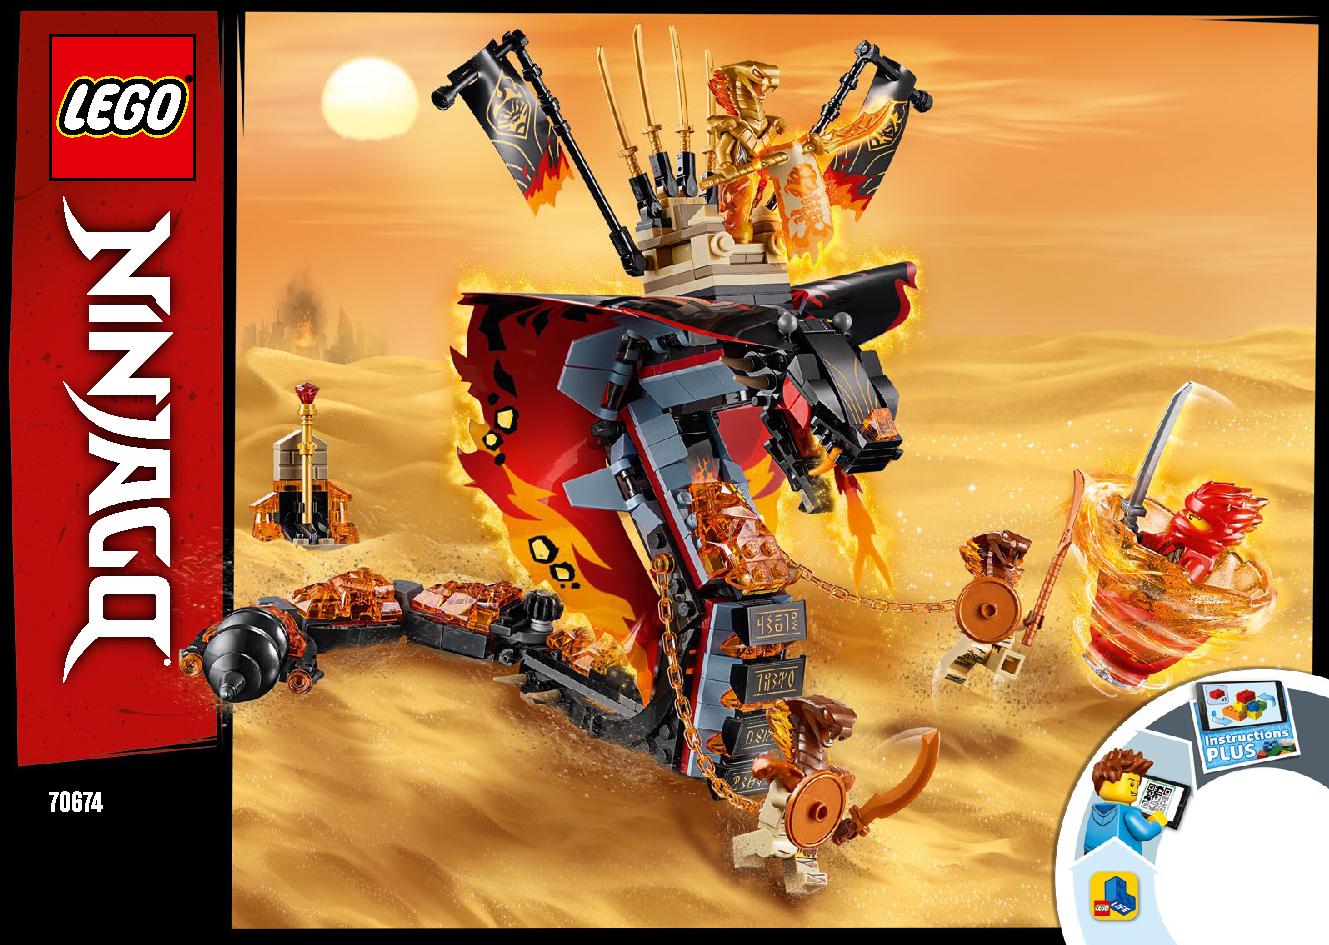 Fire Fang 70674 LEGO information LEGO instructions 1 page